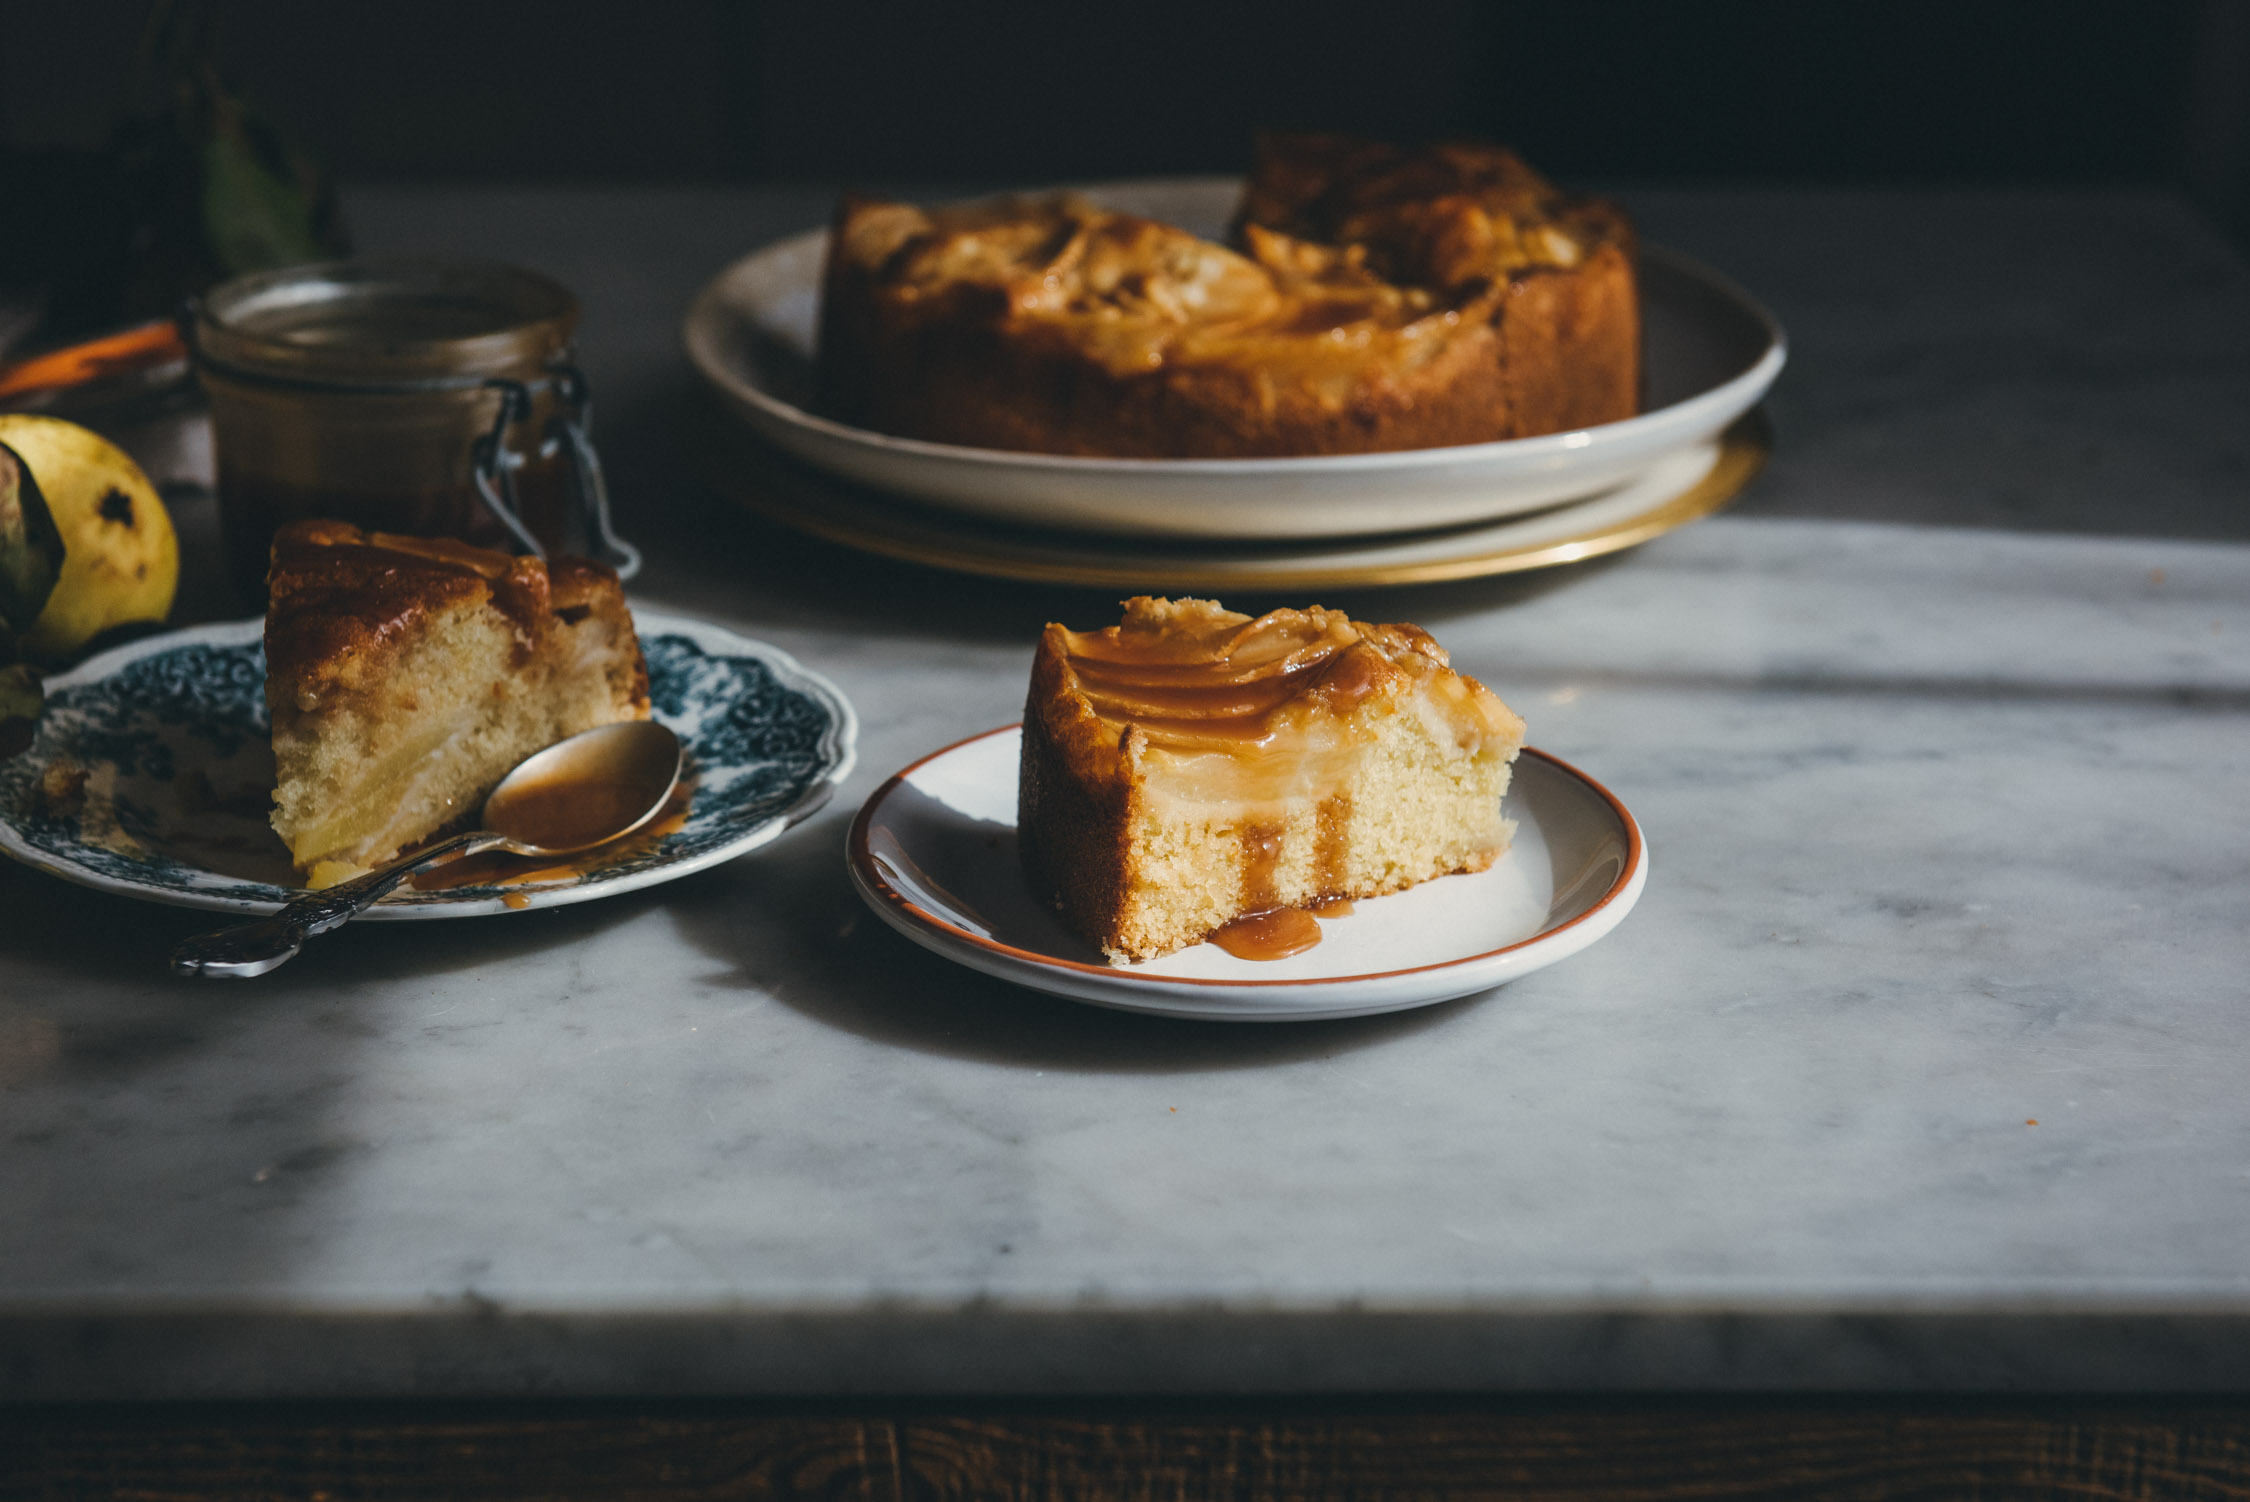  Pear Cake with Salted Caramel 